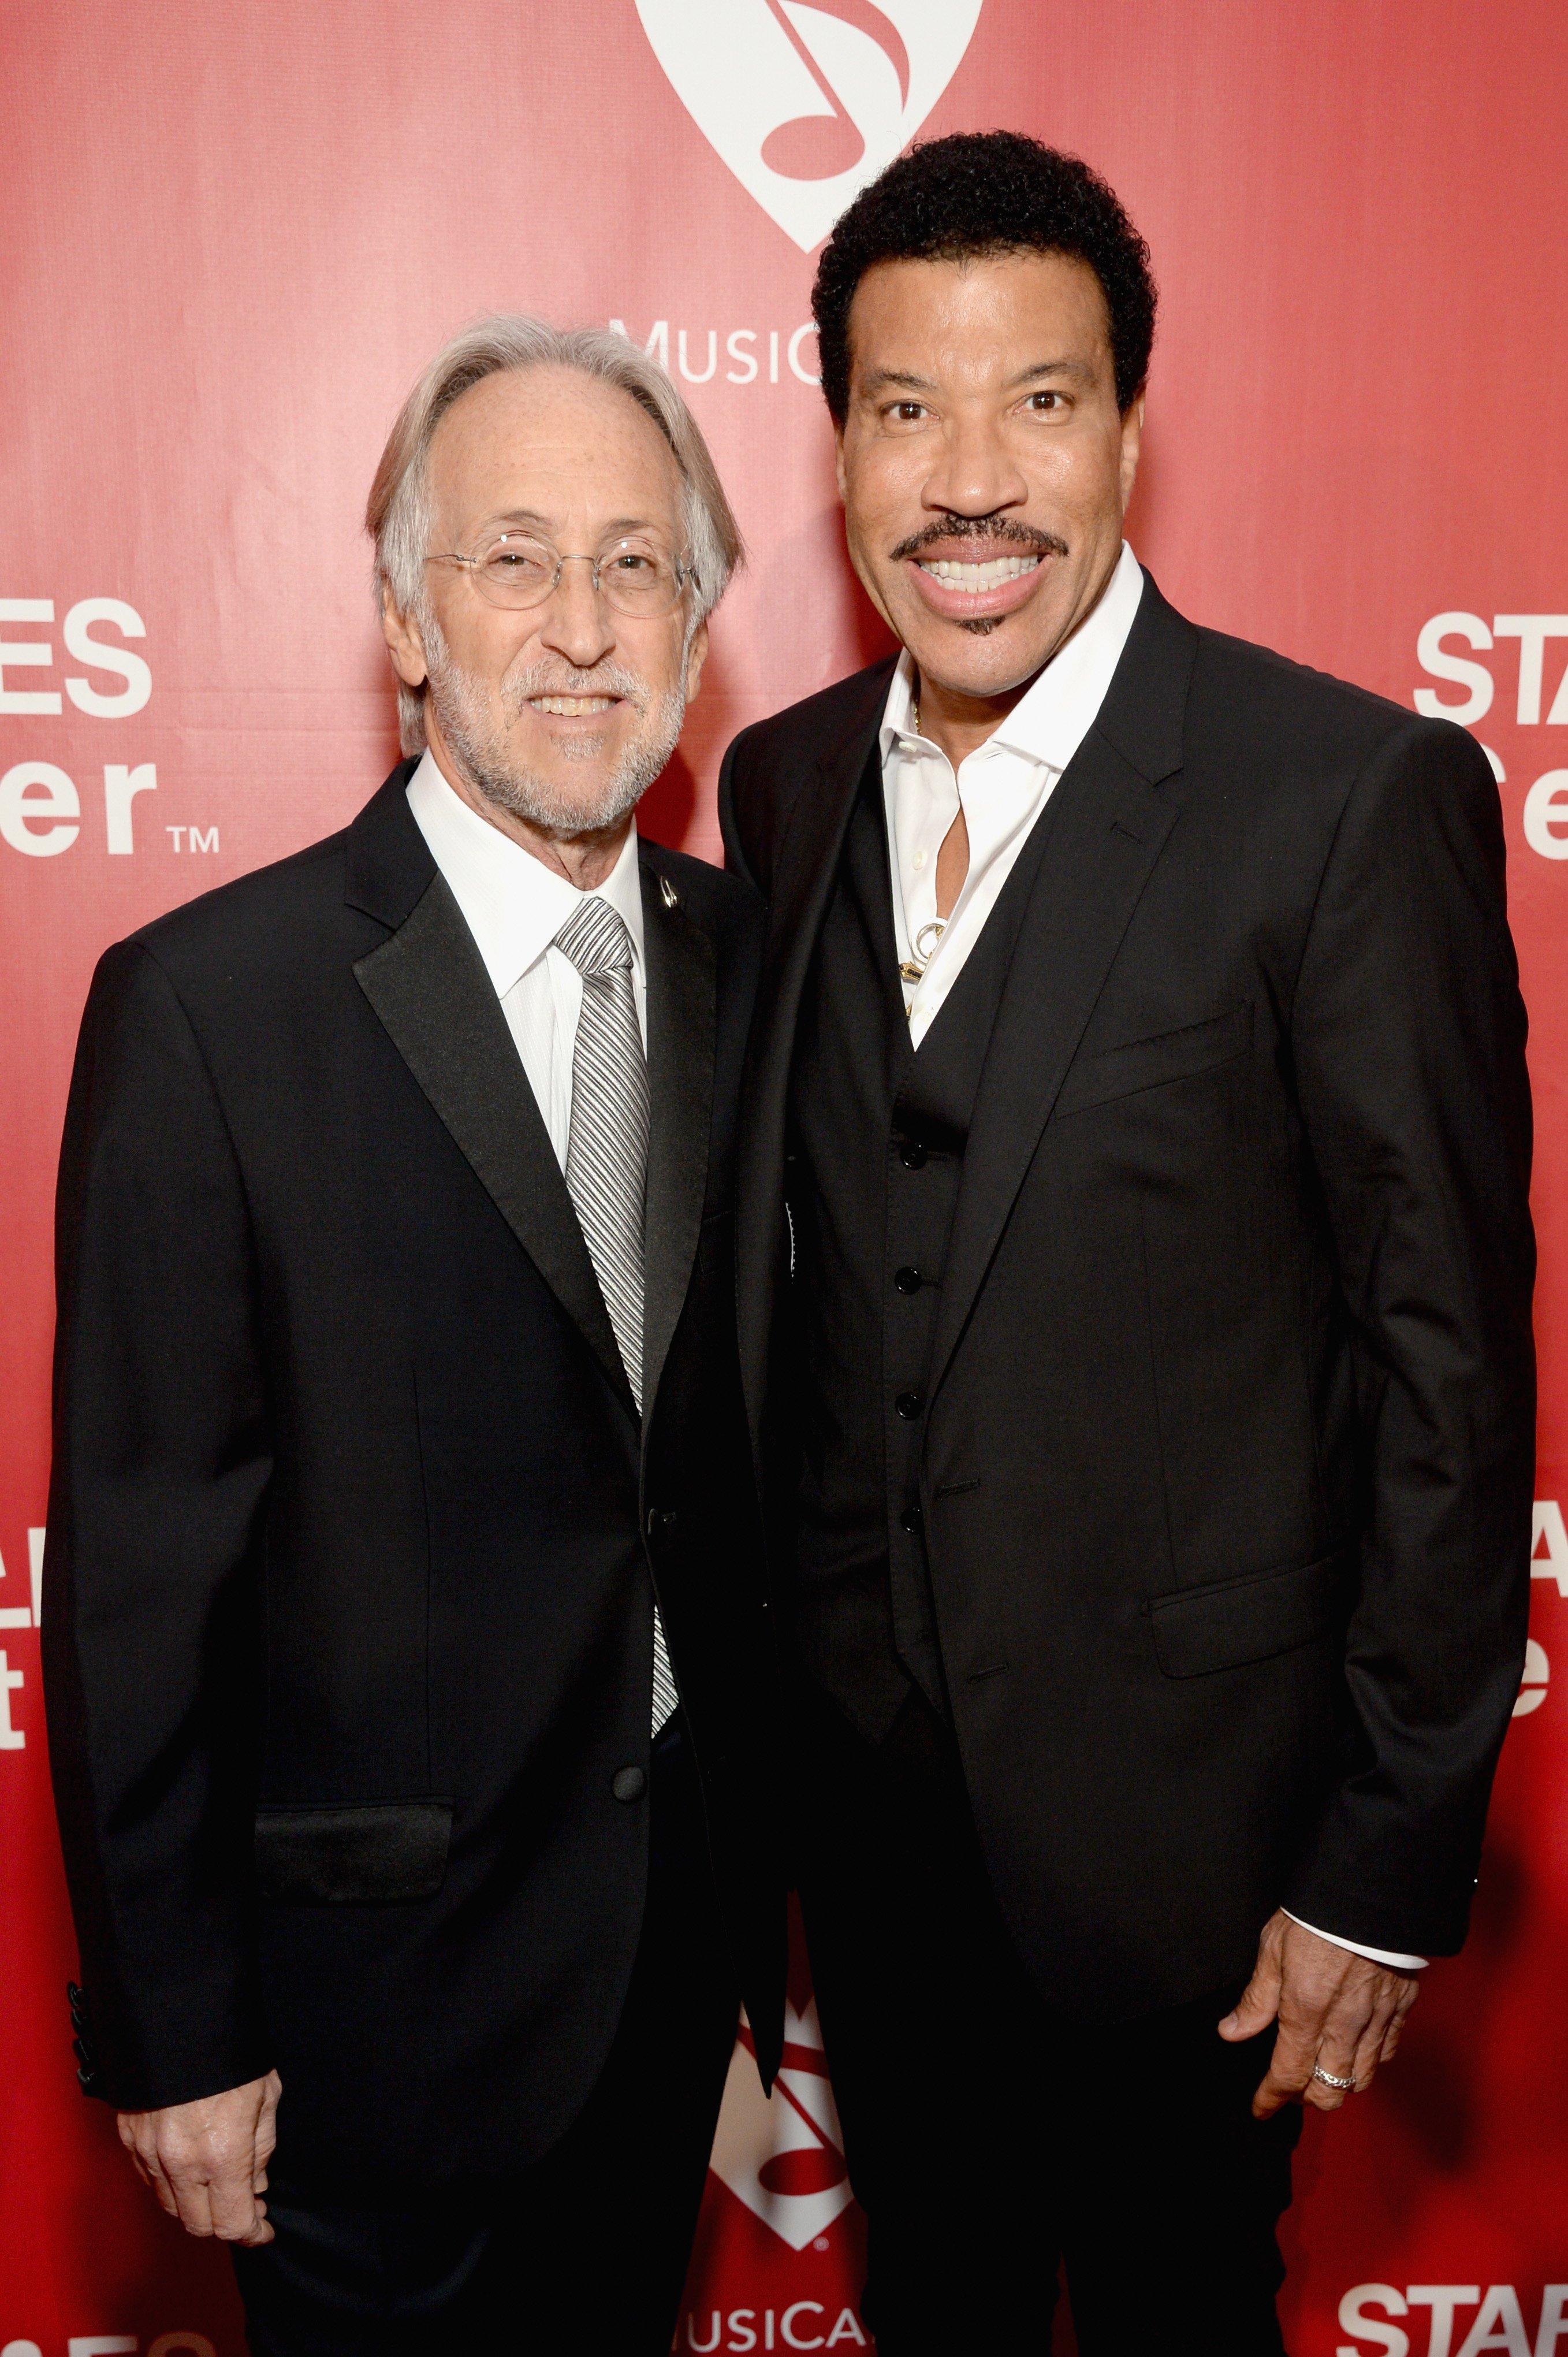 Neil Portnow, Lionel Richie at MusiCares Person of the Year 